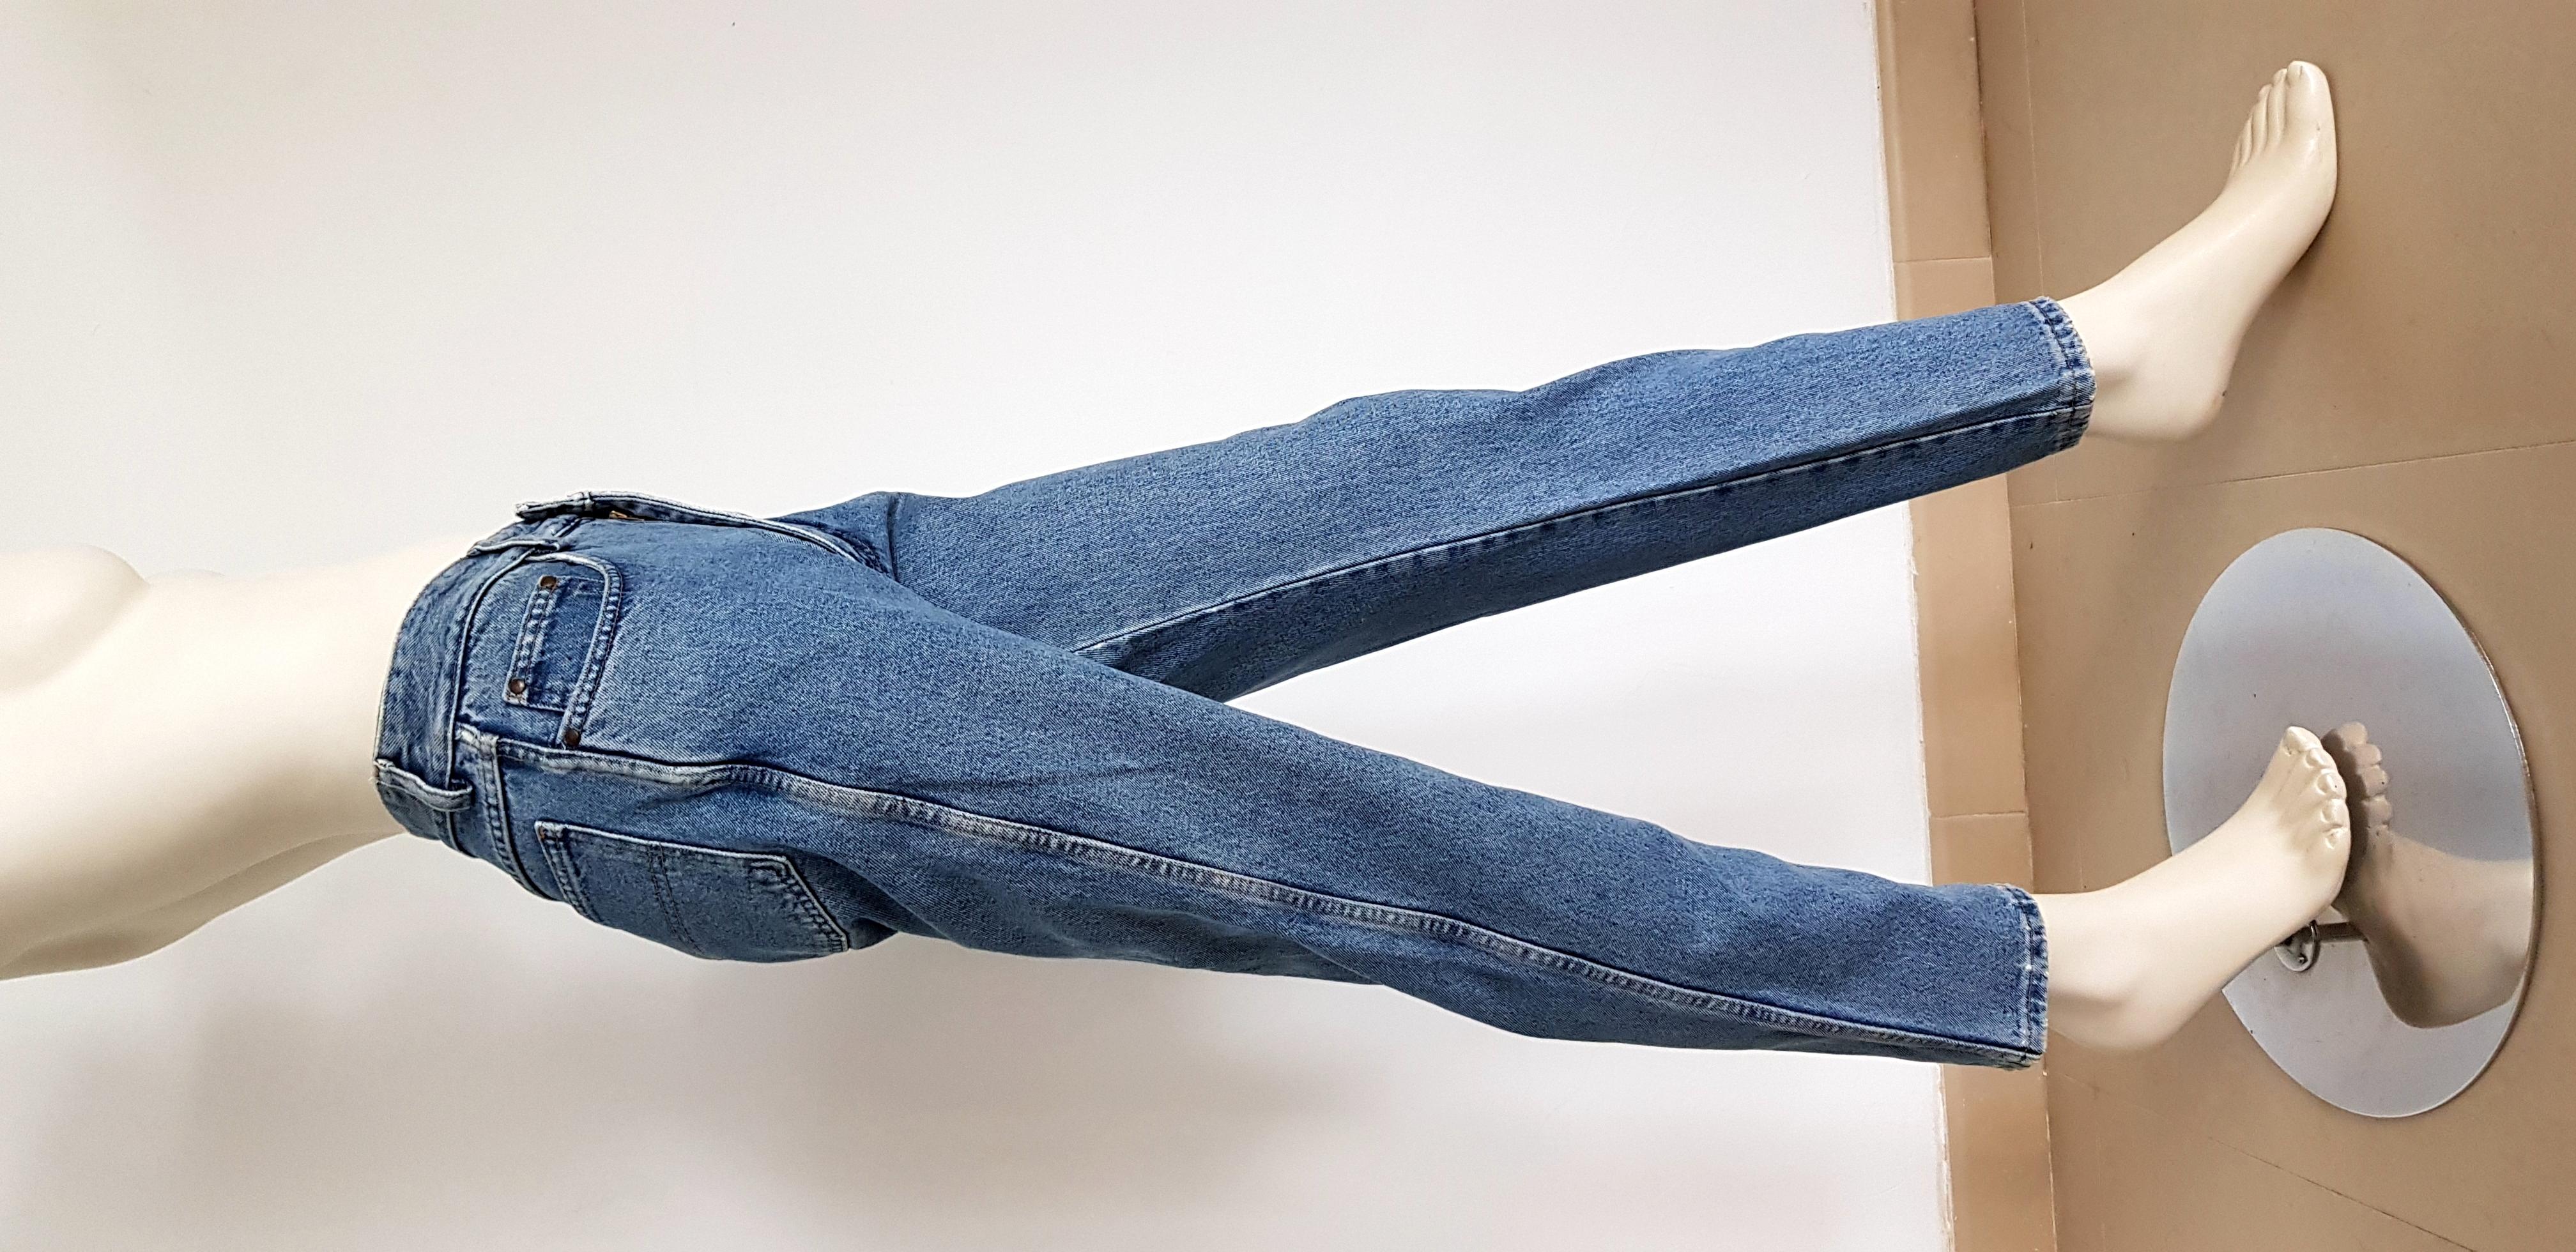 Katharine HAMNETT Jeans - Unworn, New.

SIZE: equivalent to about Small / Medium, please review approx measurements as follows in cm. 
PANTS: lenght 98, inseam length 71, waist circumference 72, hip circumference 99, leg hem circumference 30. 
TO